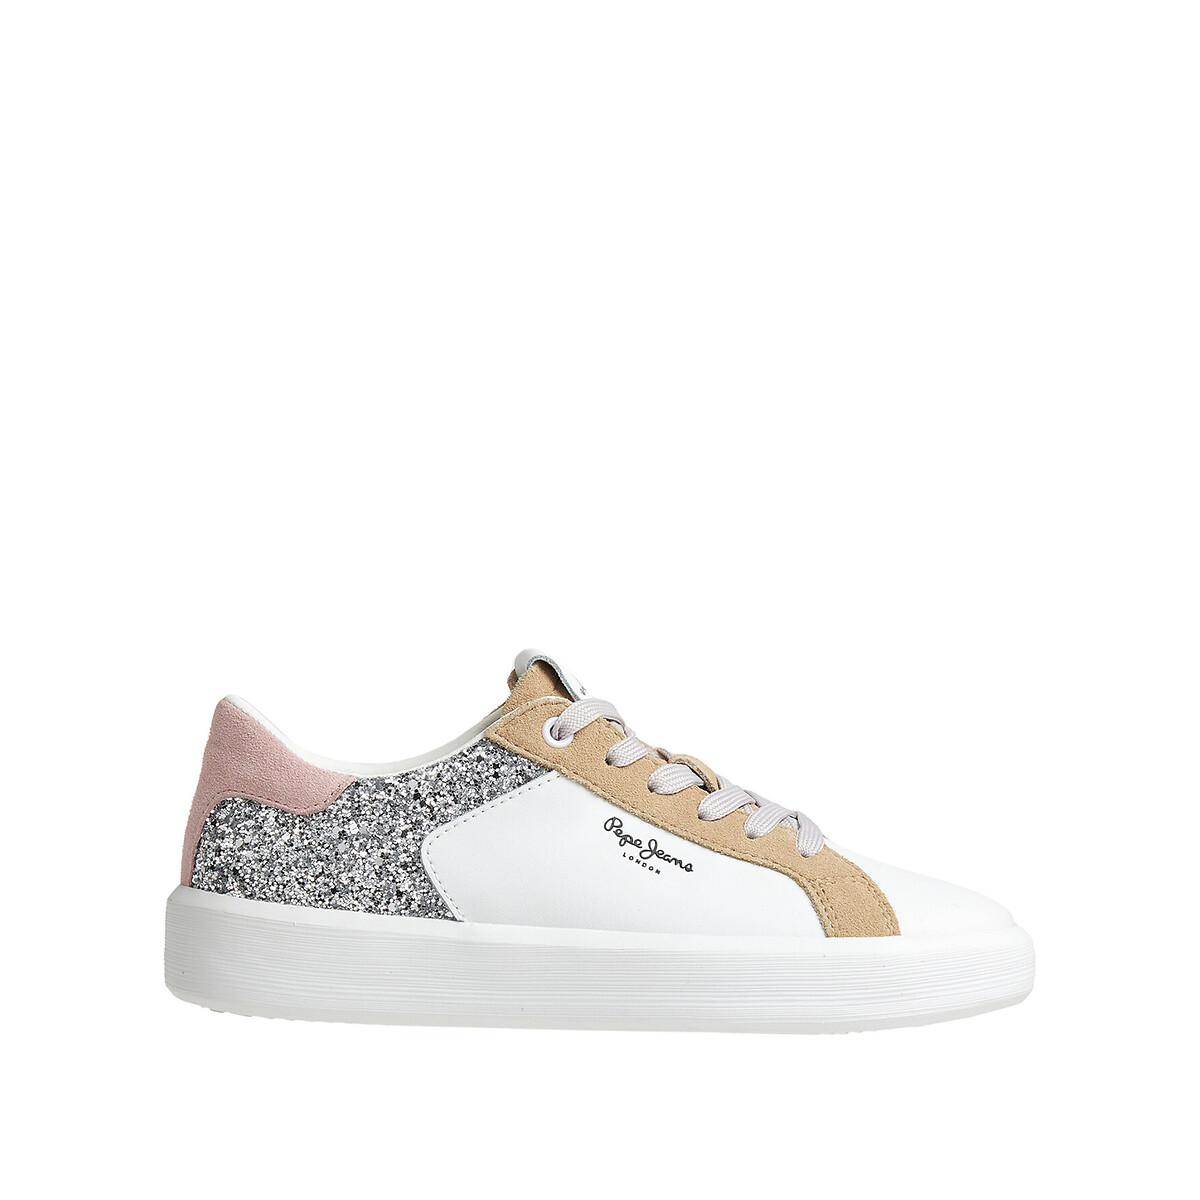 Pepe jeans Sneakers Dobbie Mix